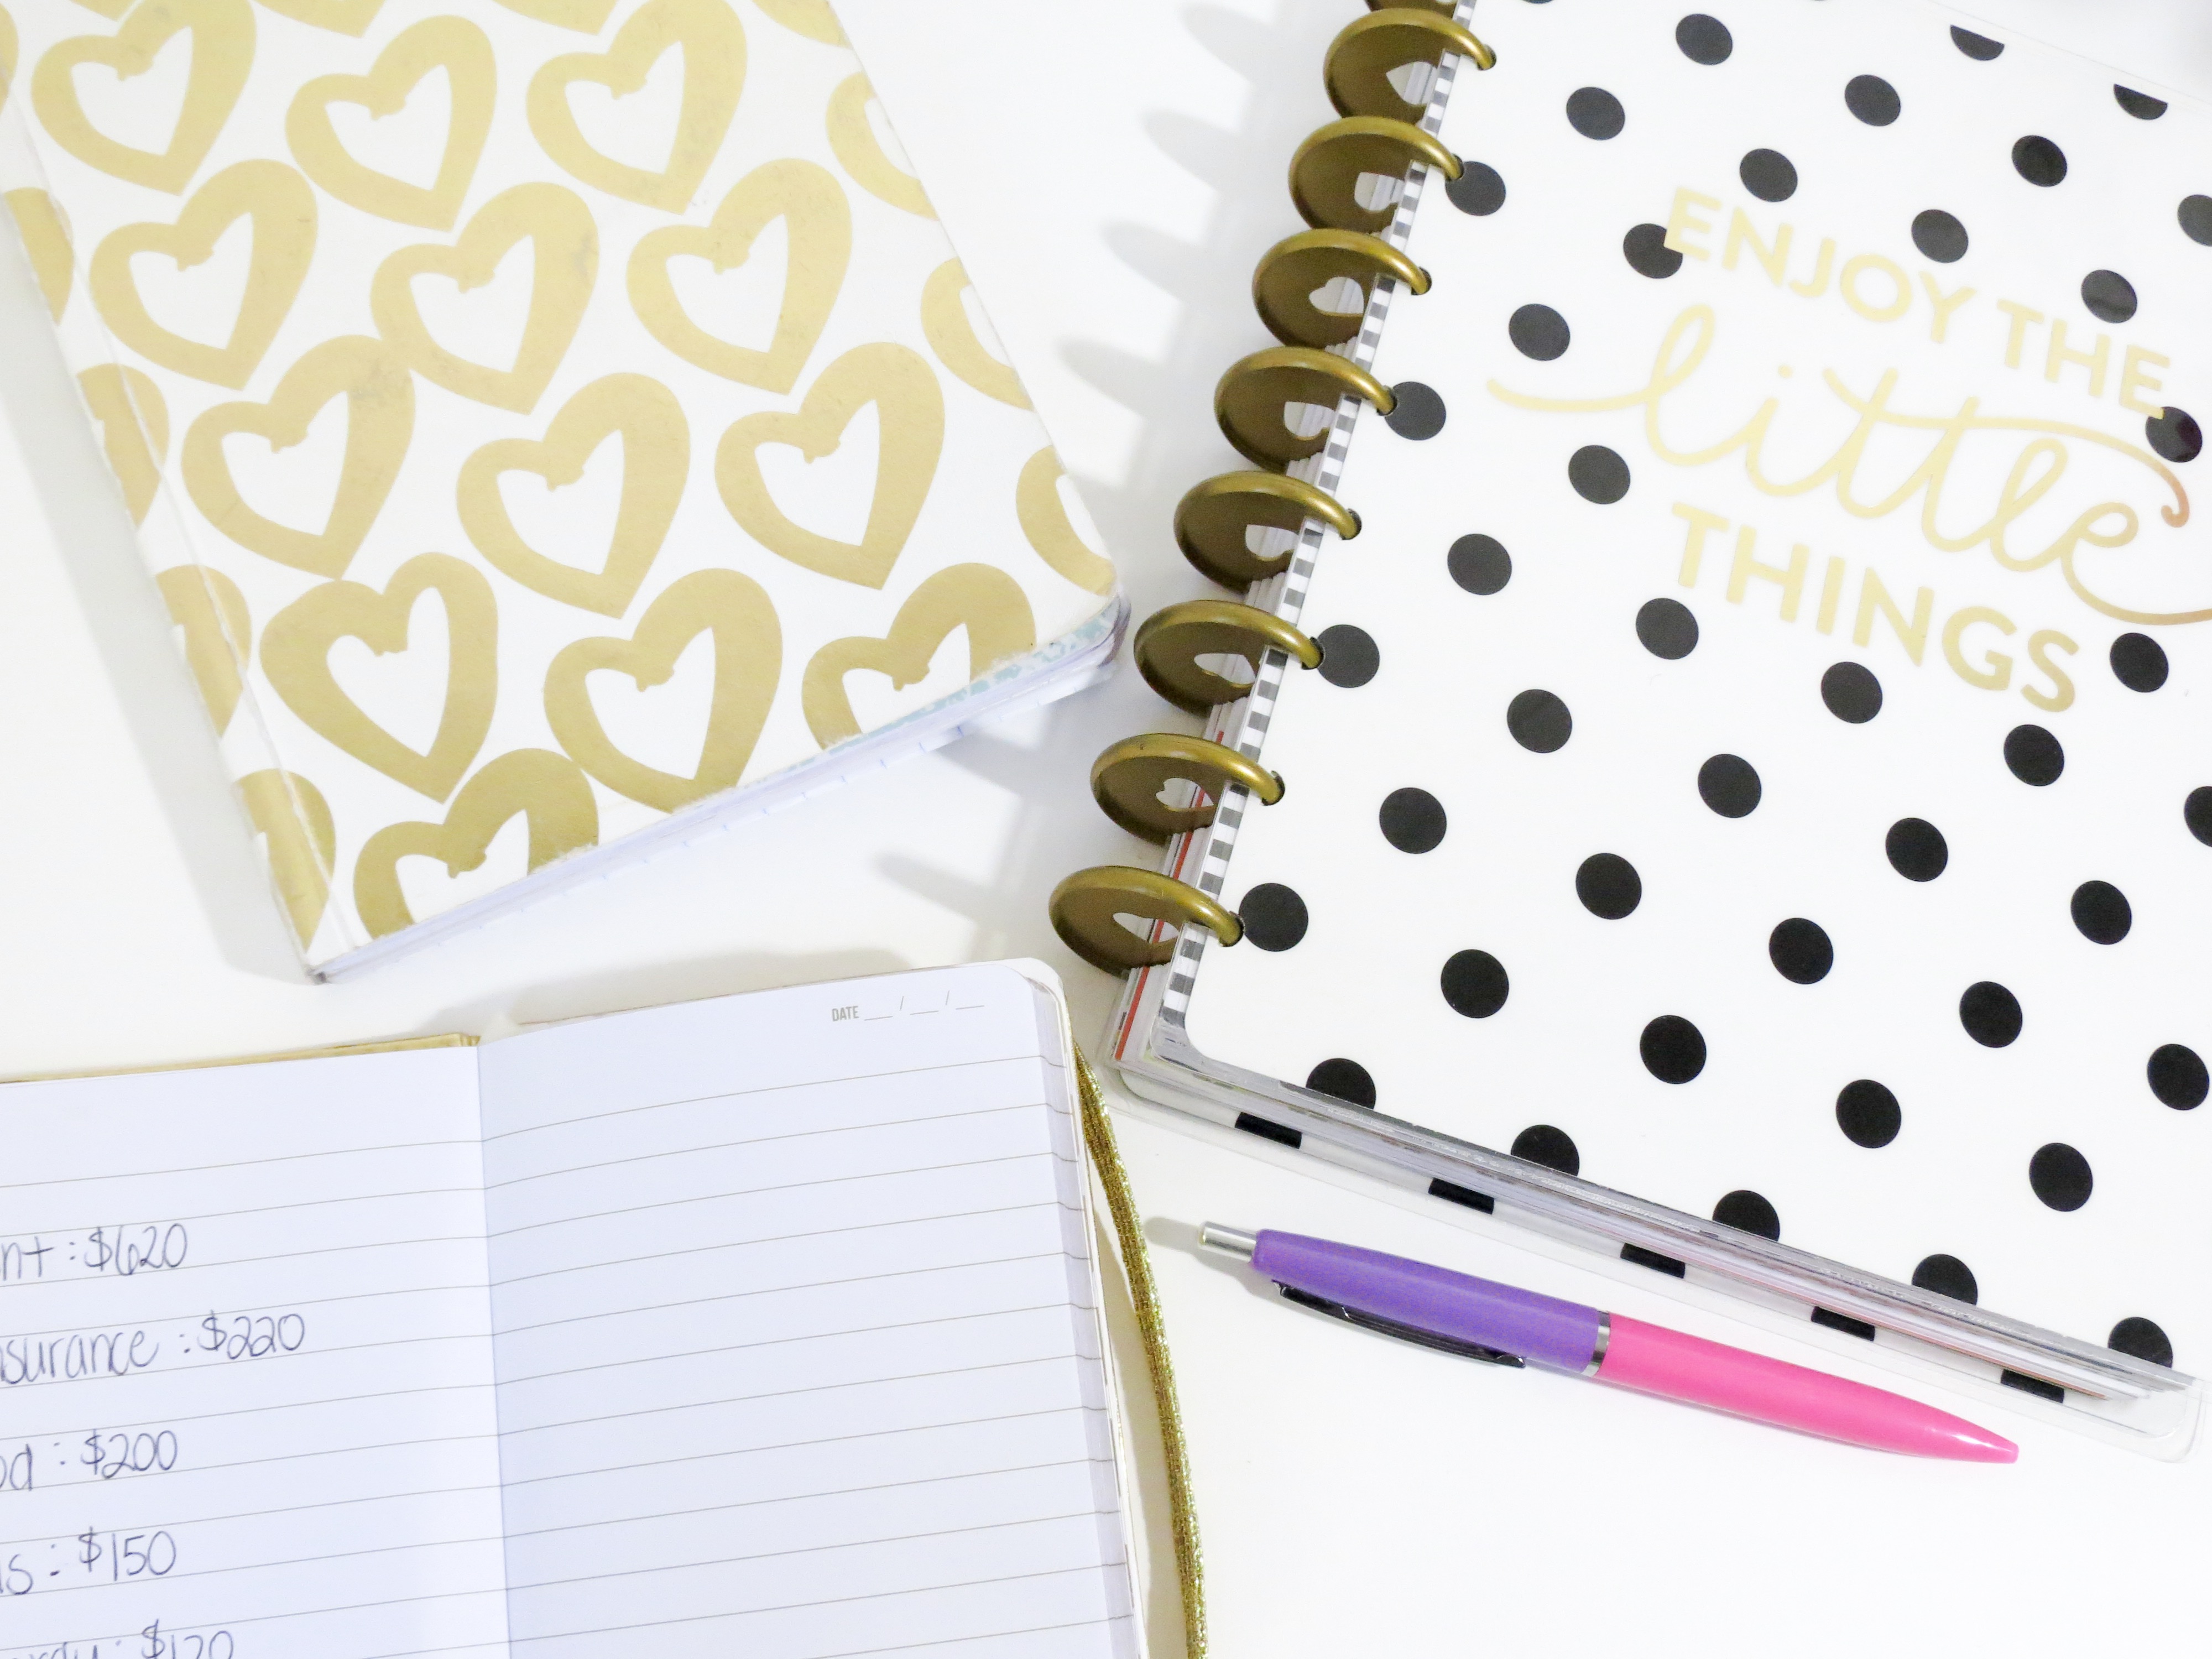 The Happy Planner Accessories for Women